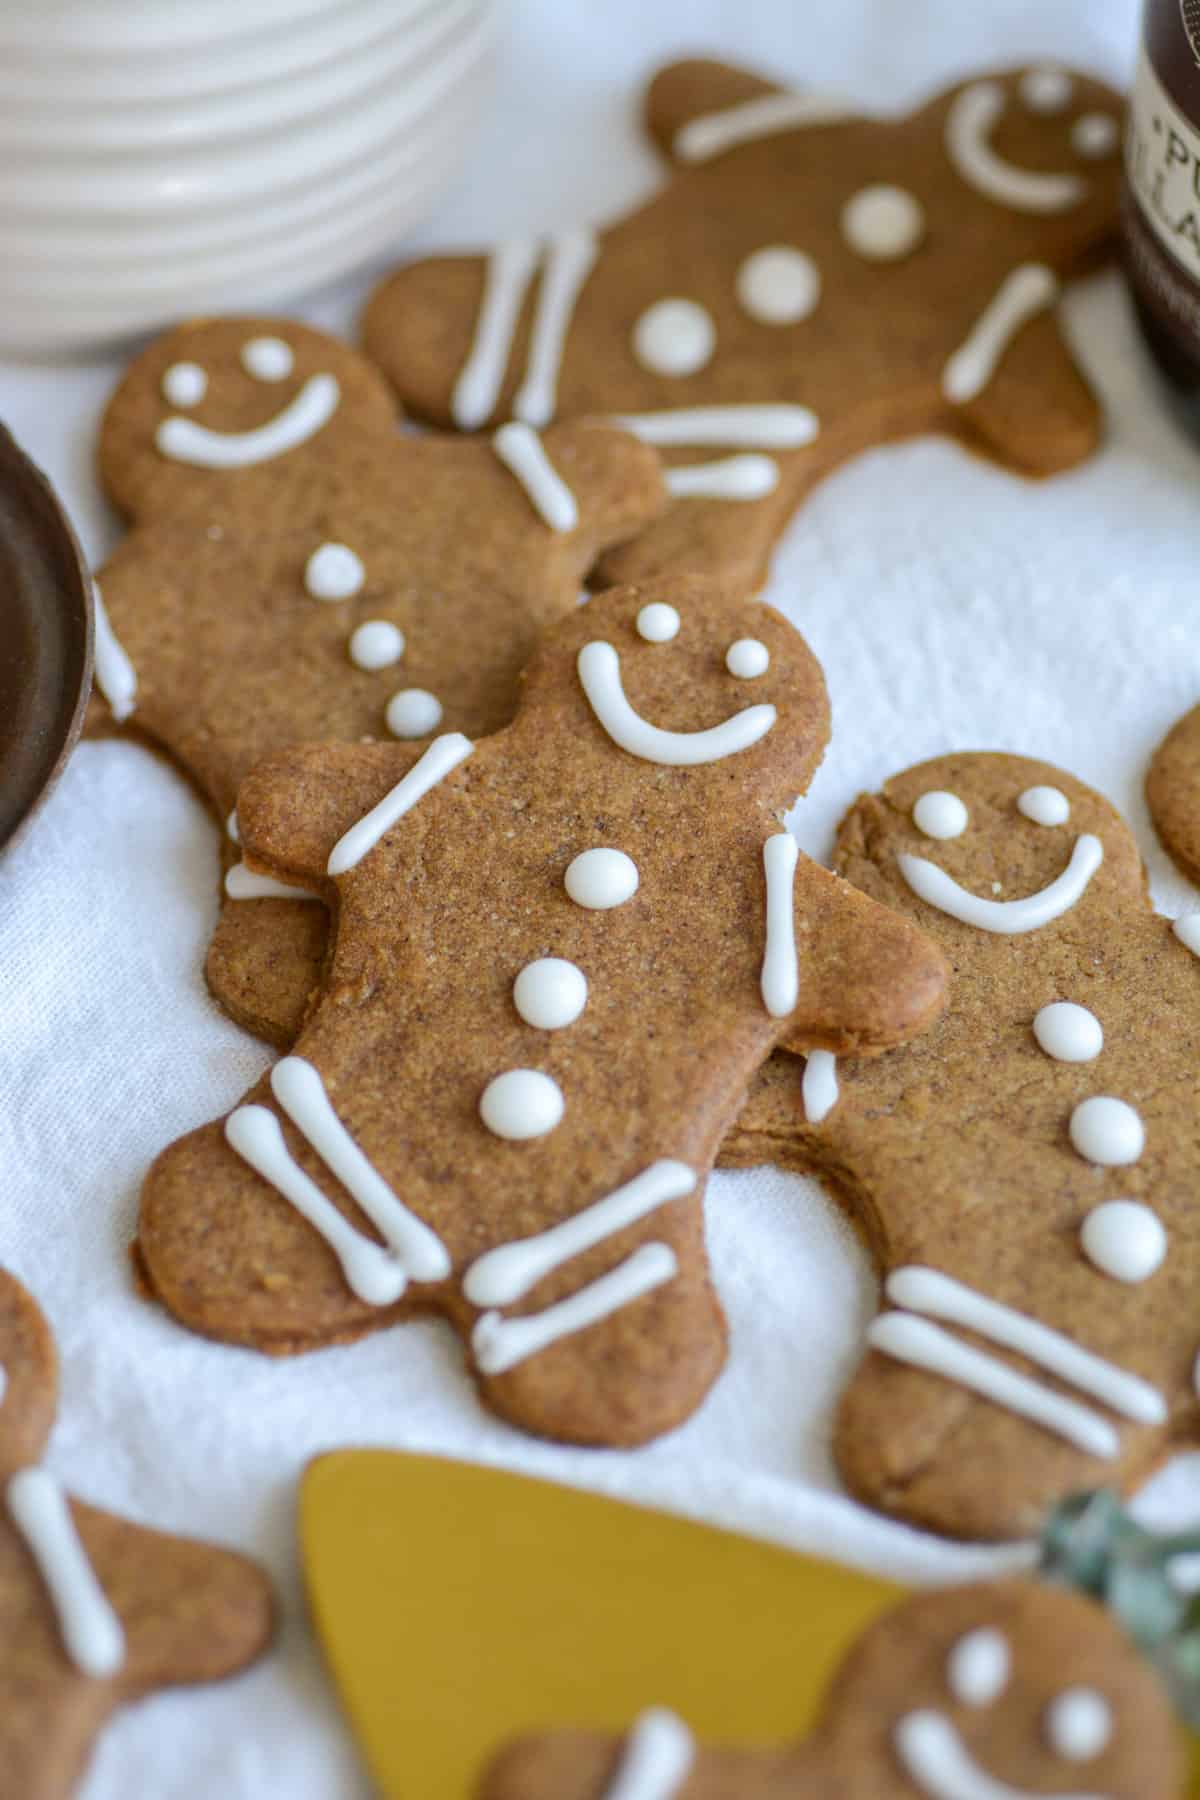 Decorated Vegan Gingersnaps on a white cloth.